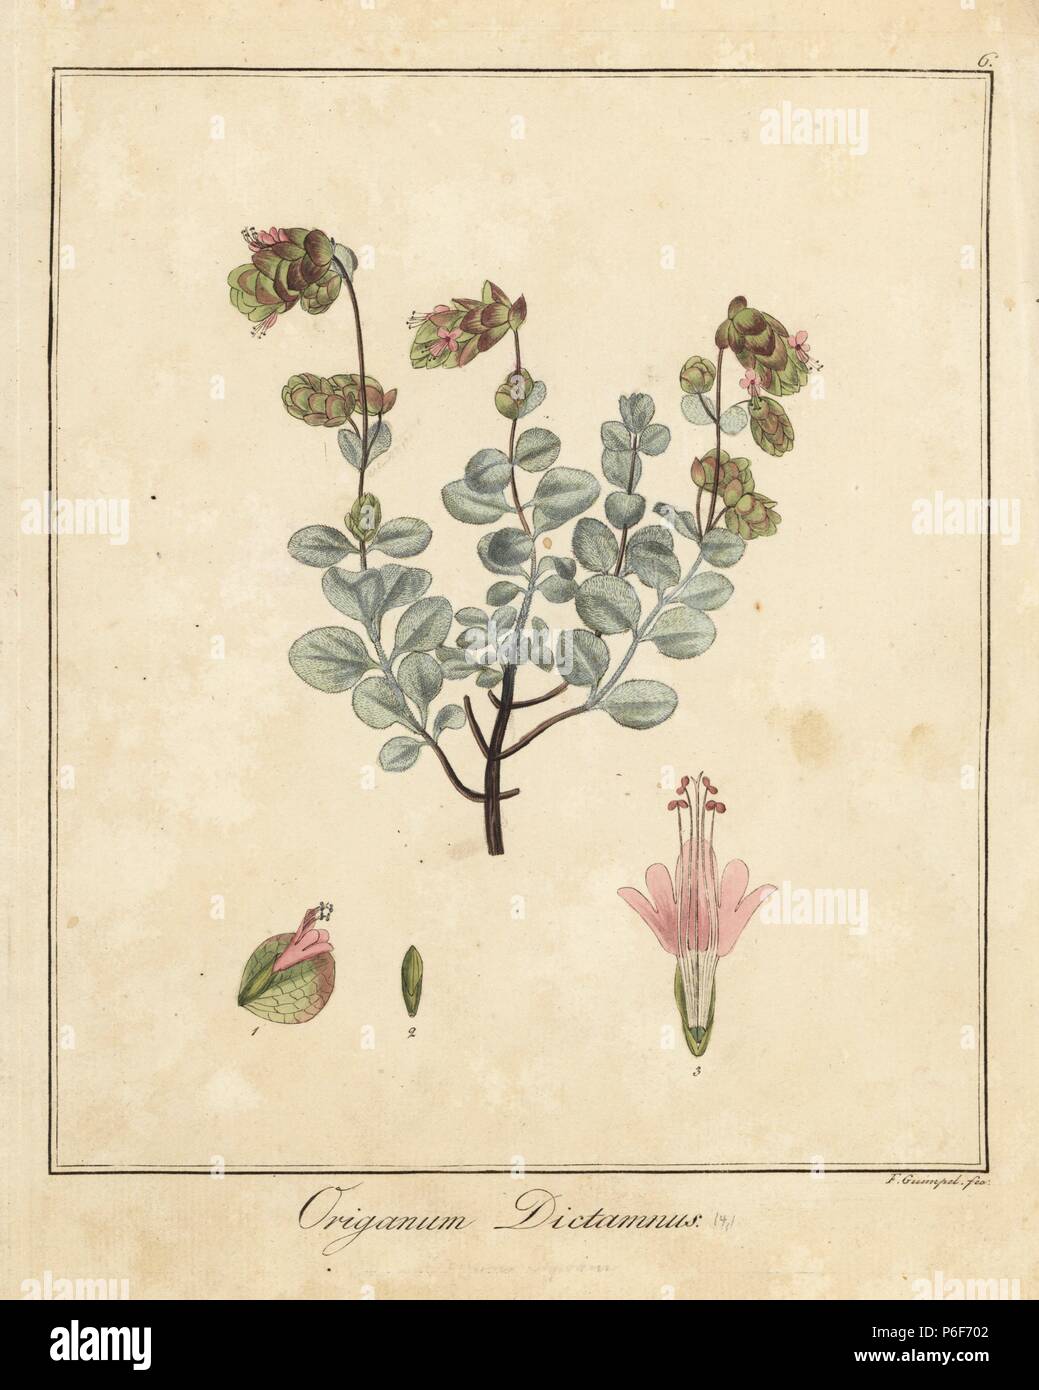 Dittany of Crete, Origanum dictamnus. Handcoloured copperplate engraving by F. Guimpel from Dr. Friedrich Gottlob Hayne's Medical Botany, Berlin, 1822. Hayne (1763-1832) was a German botanist, apothecary and professor of pharmaceutical botany at Berlin University. Stock Photo